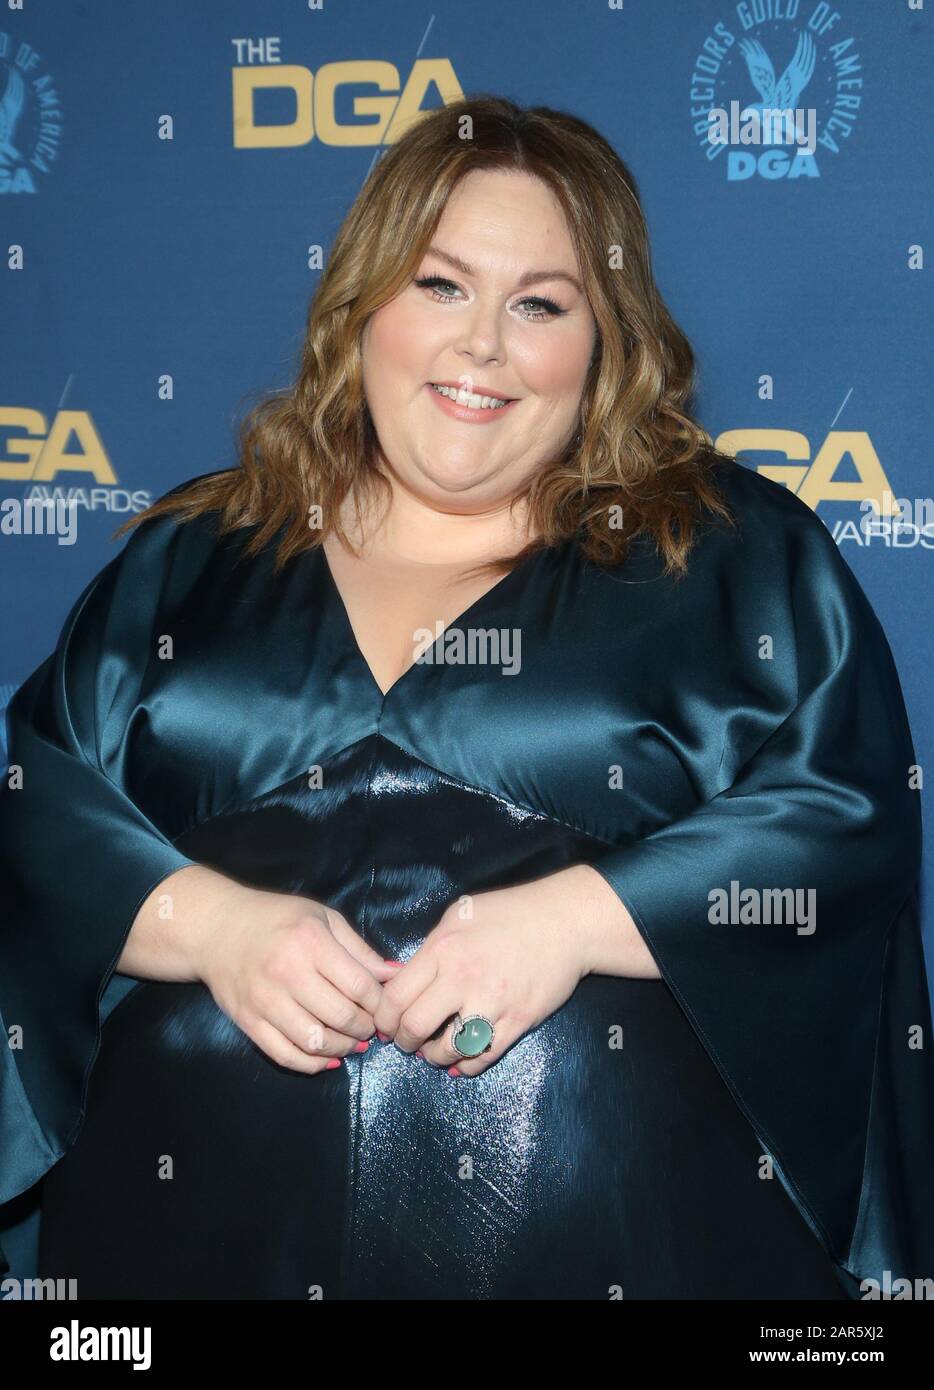 LOS ANGELES, CA - JANUARY 25: Chrissy Metz, at the 72nd Annual DGA ...